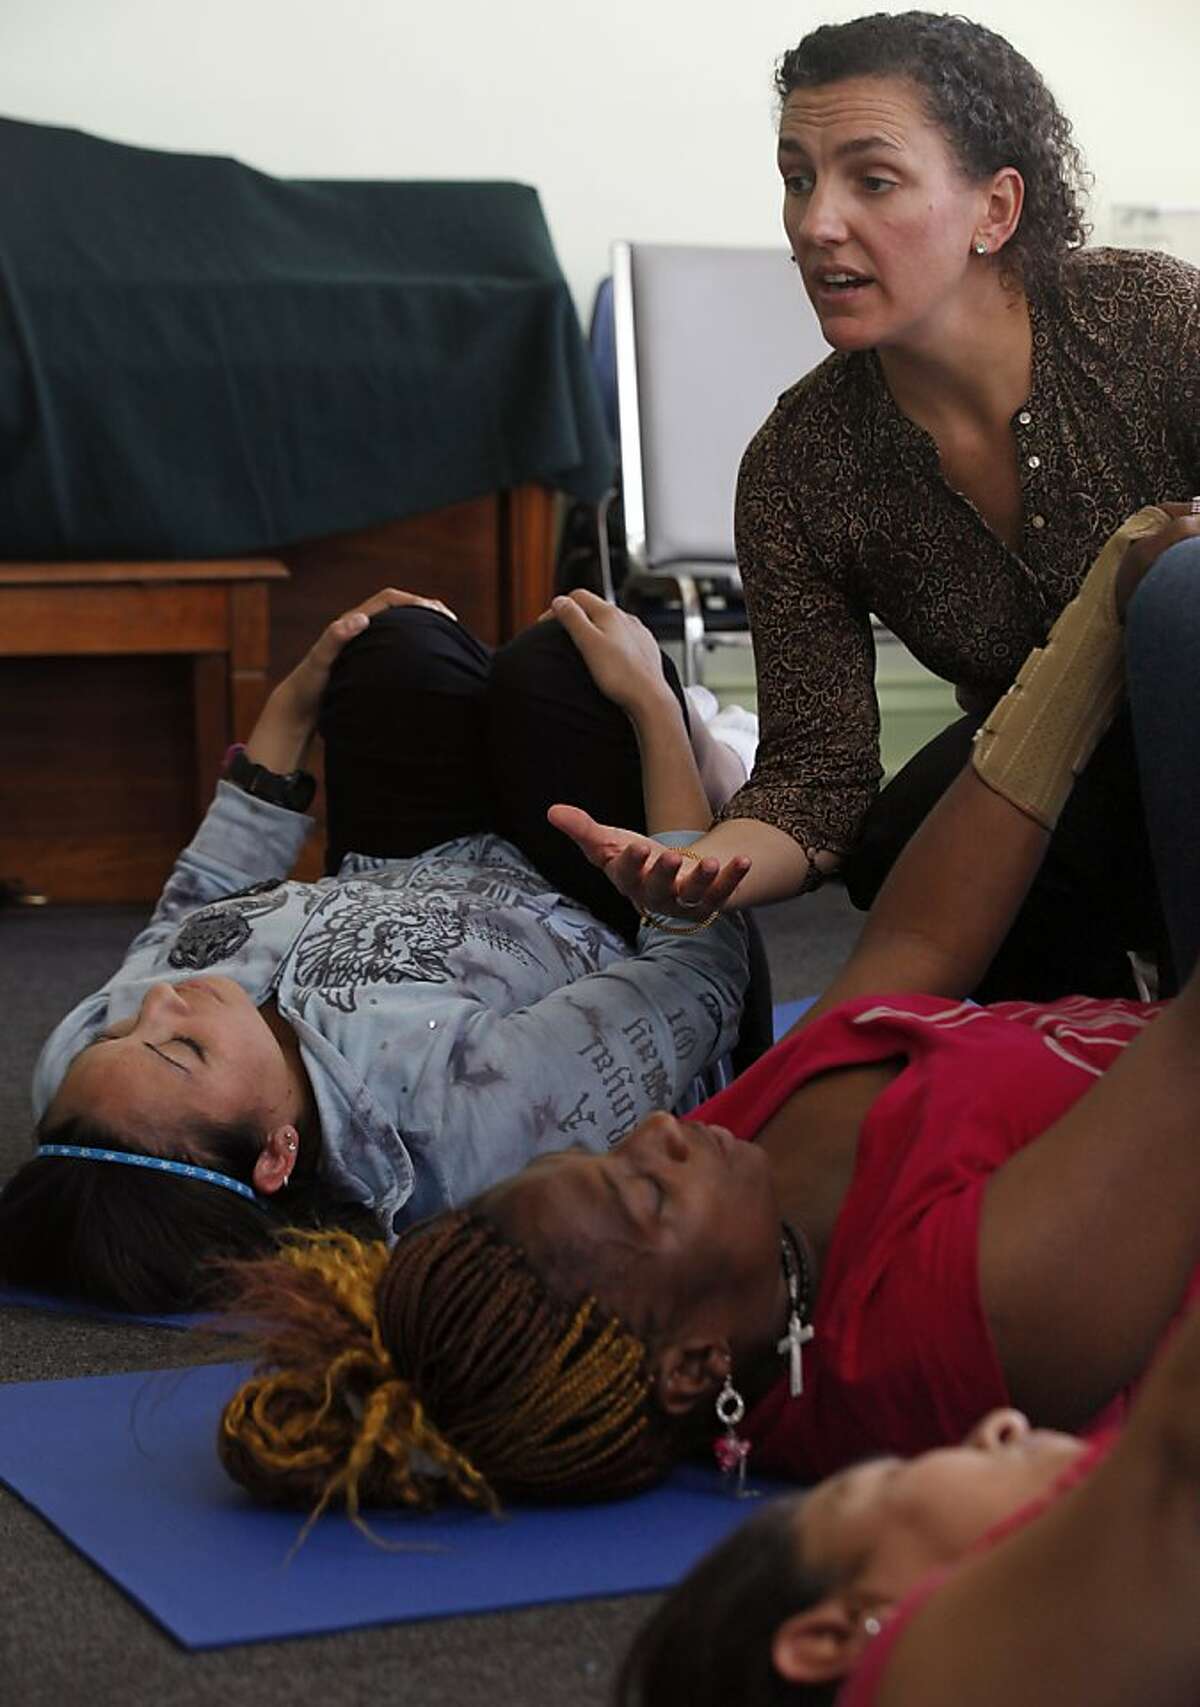 Kate Holcombe, founder of the Healing Yoga Foundation leads a class for Compass Family Services with a group of homeless mothers Wednesday September 21, 2011 in San Francisco.